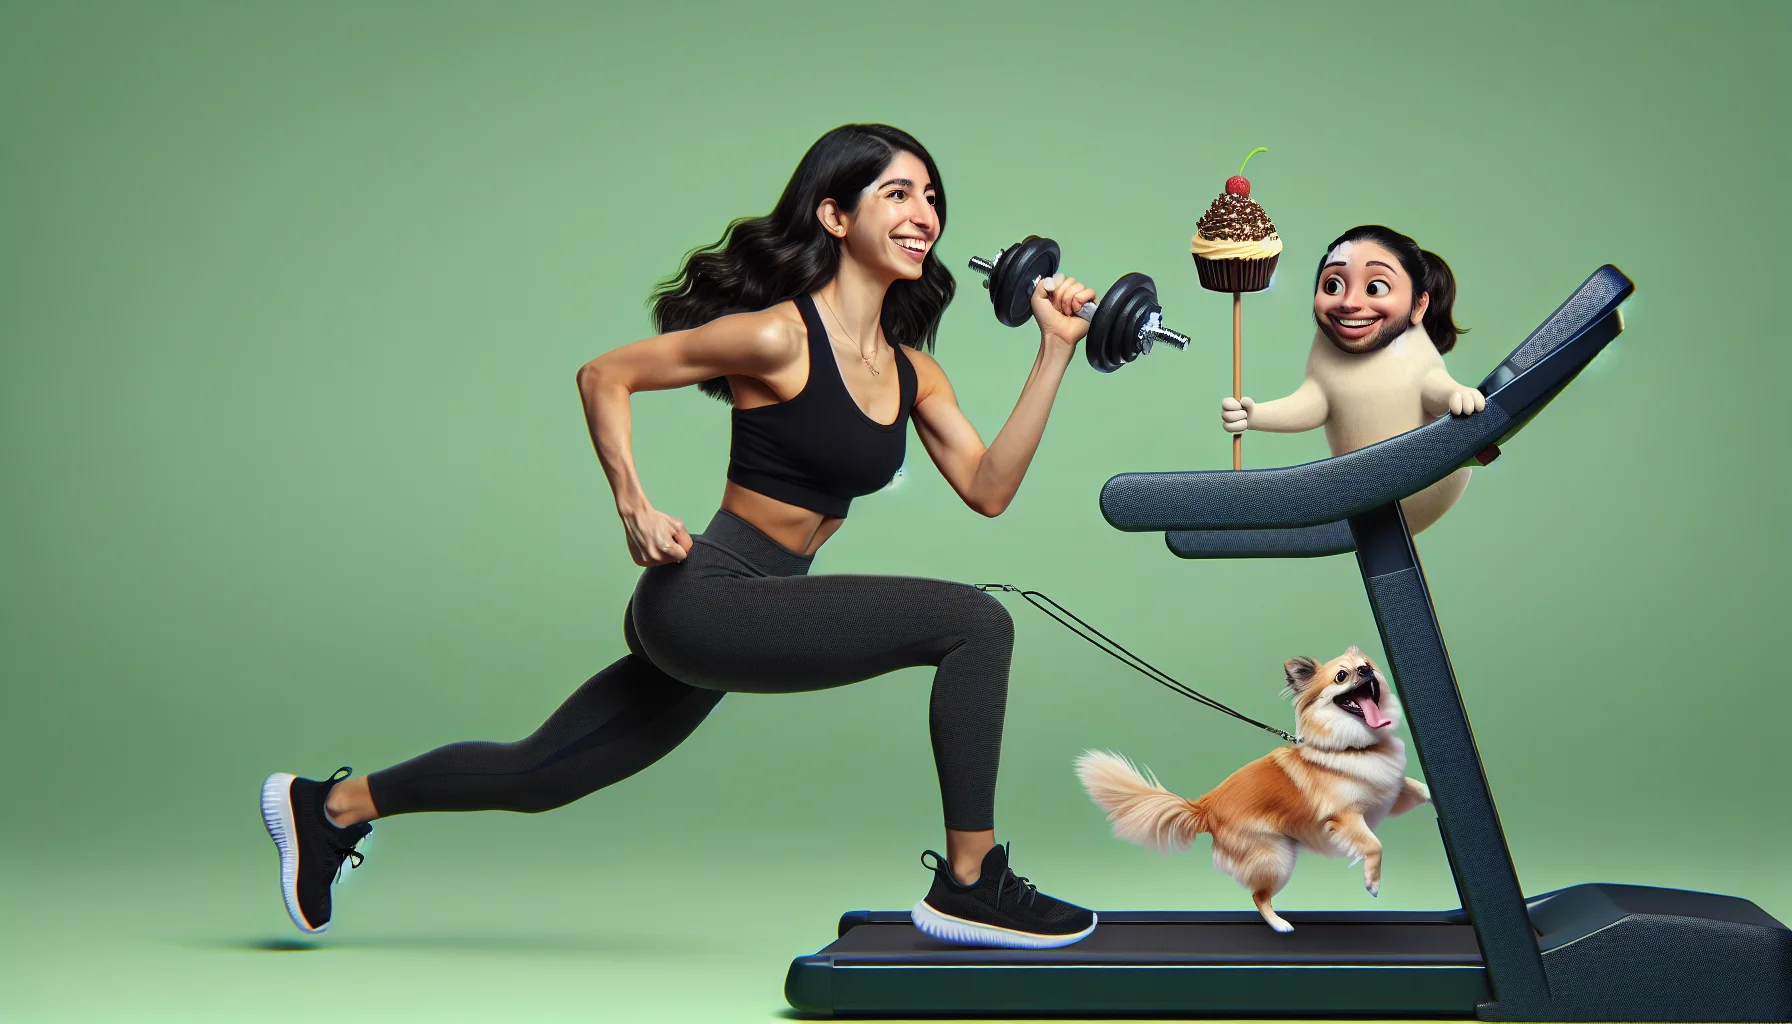 Create a realistic image showcasing a young, athletic Hispanic woman with long dark hair in a humorous scenario inspiring people to exercise. She could be doing something like trying to lift a too-heavy dumbbell, running on a treadmill with a piece of cake on a stick in front, or doing yoga with a funny pet interruption.